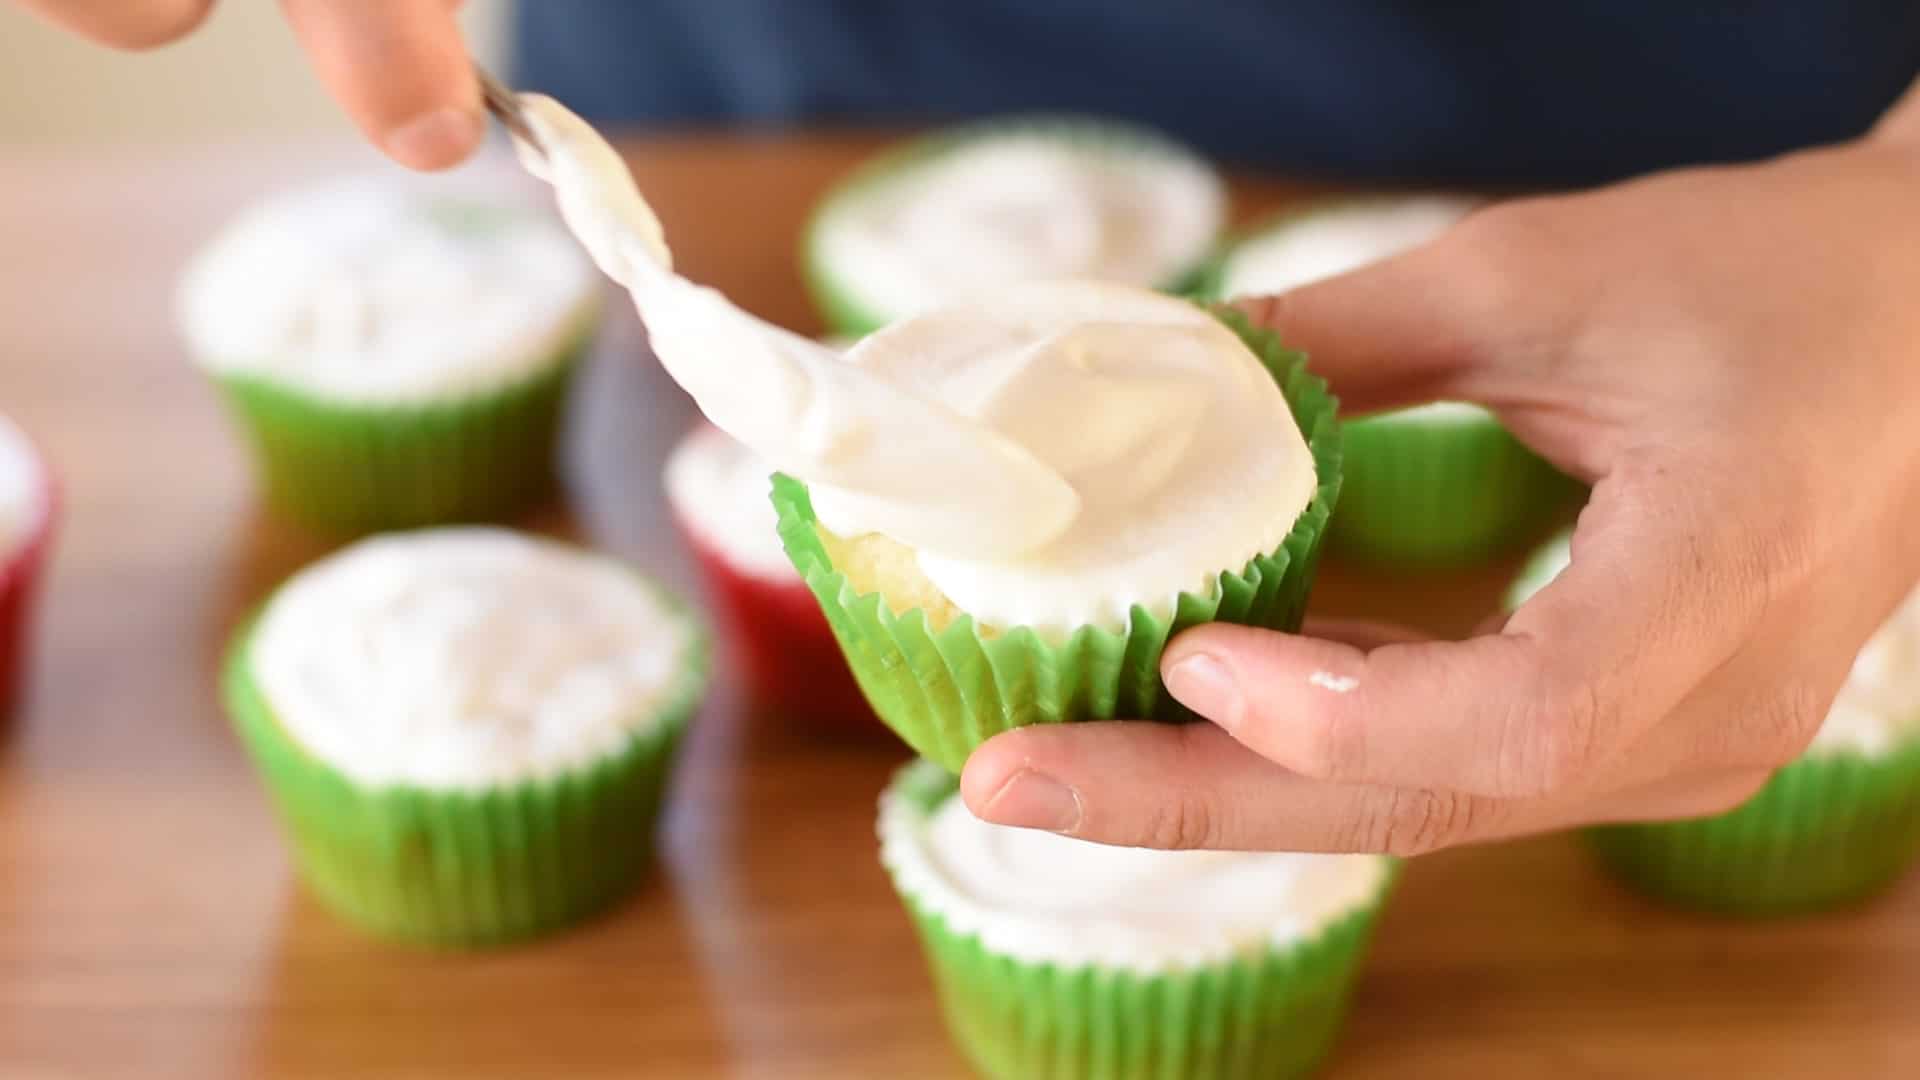 Frosting The Cupcake With Stabilized Whipped Cream.